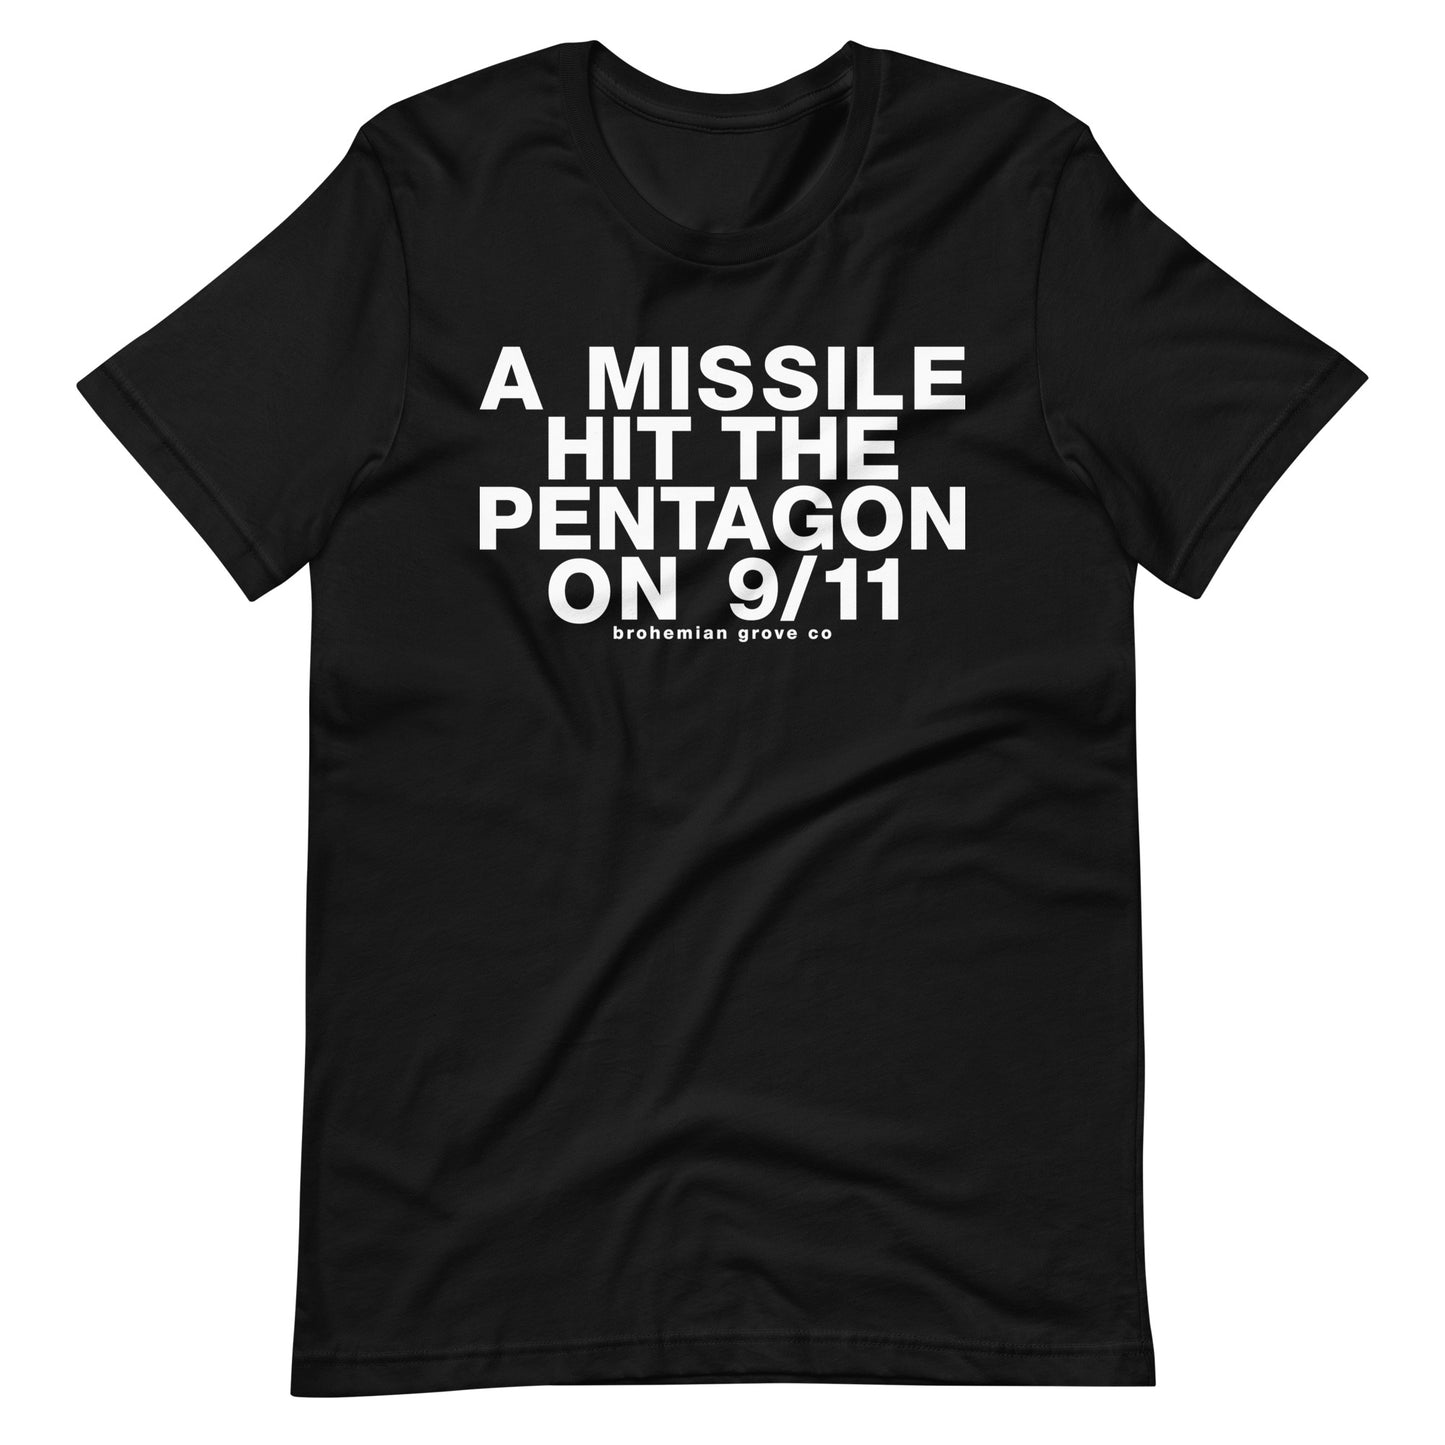 A Missile hit the Pentagon on 9/11 Unisex T-Shirt